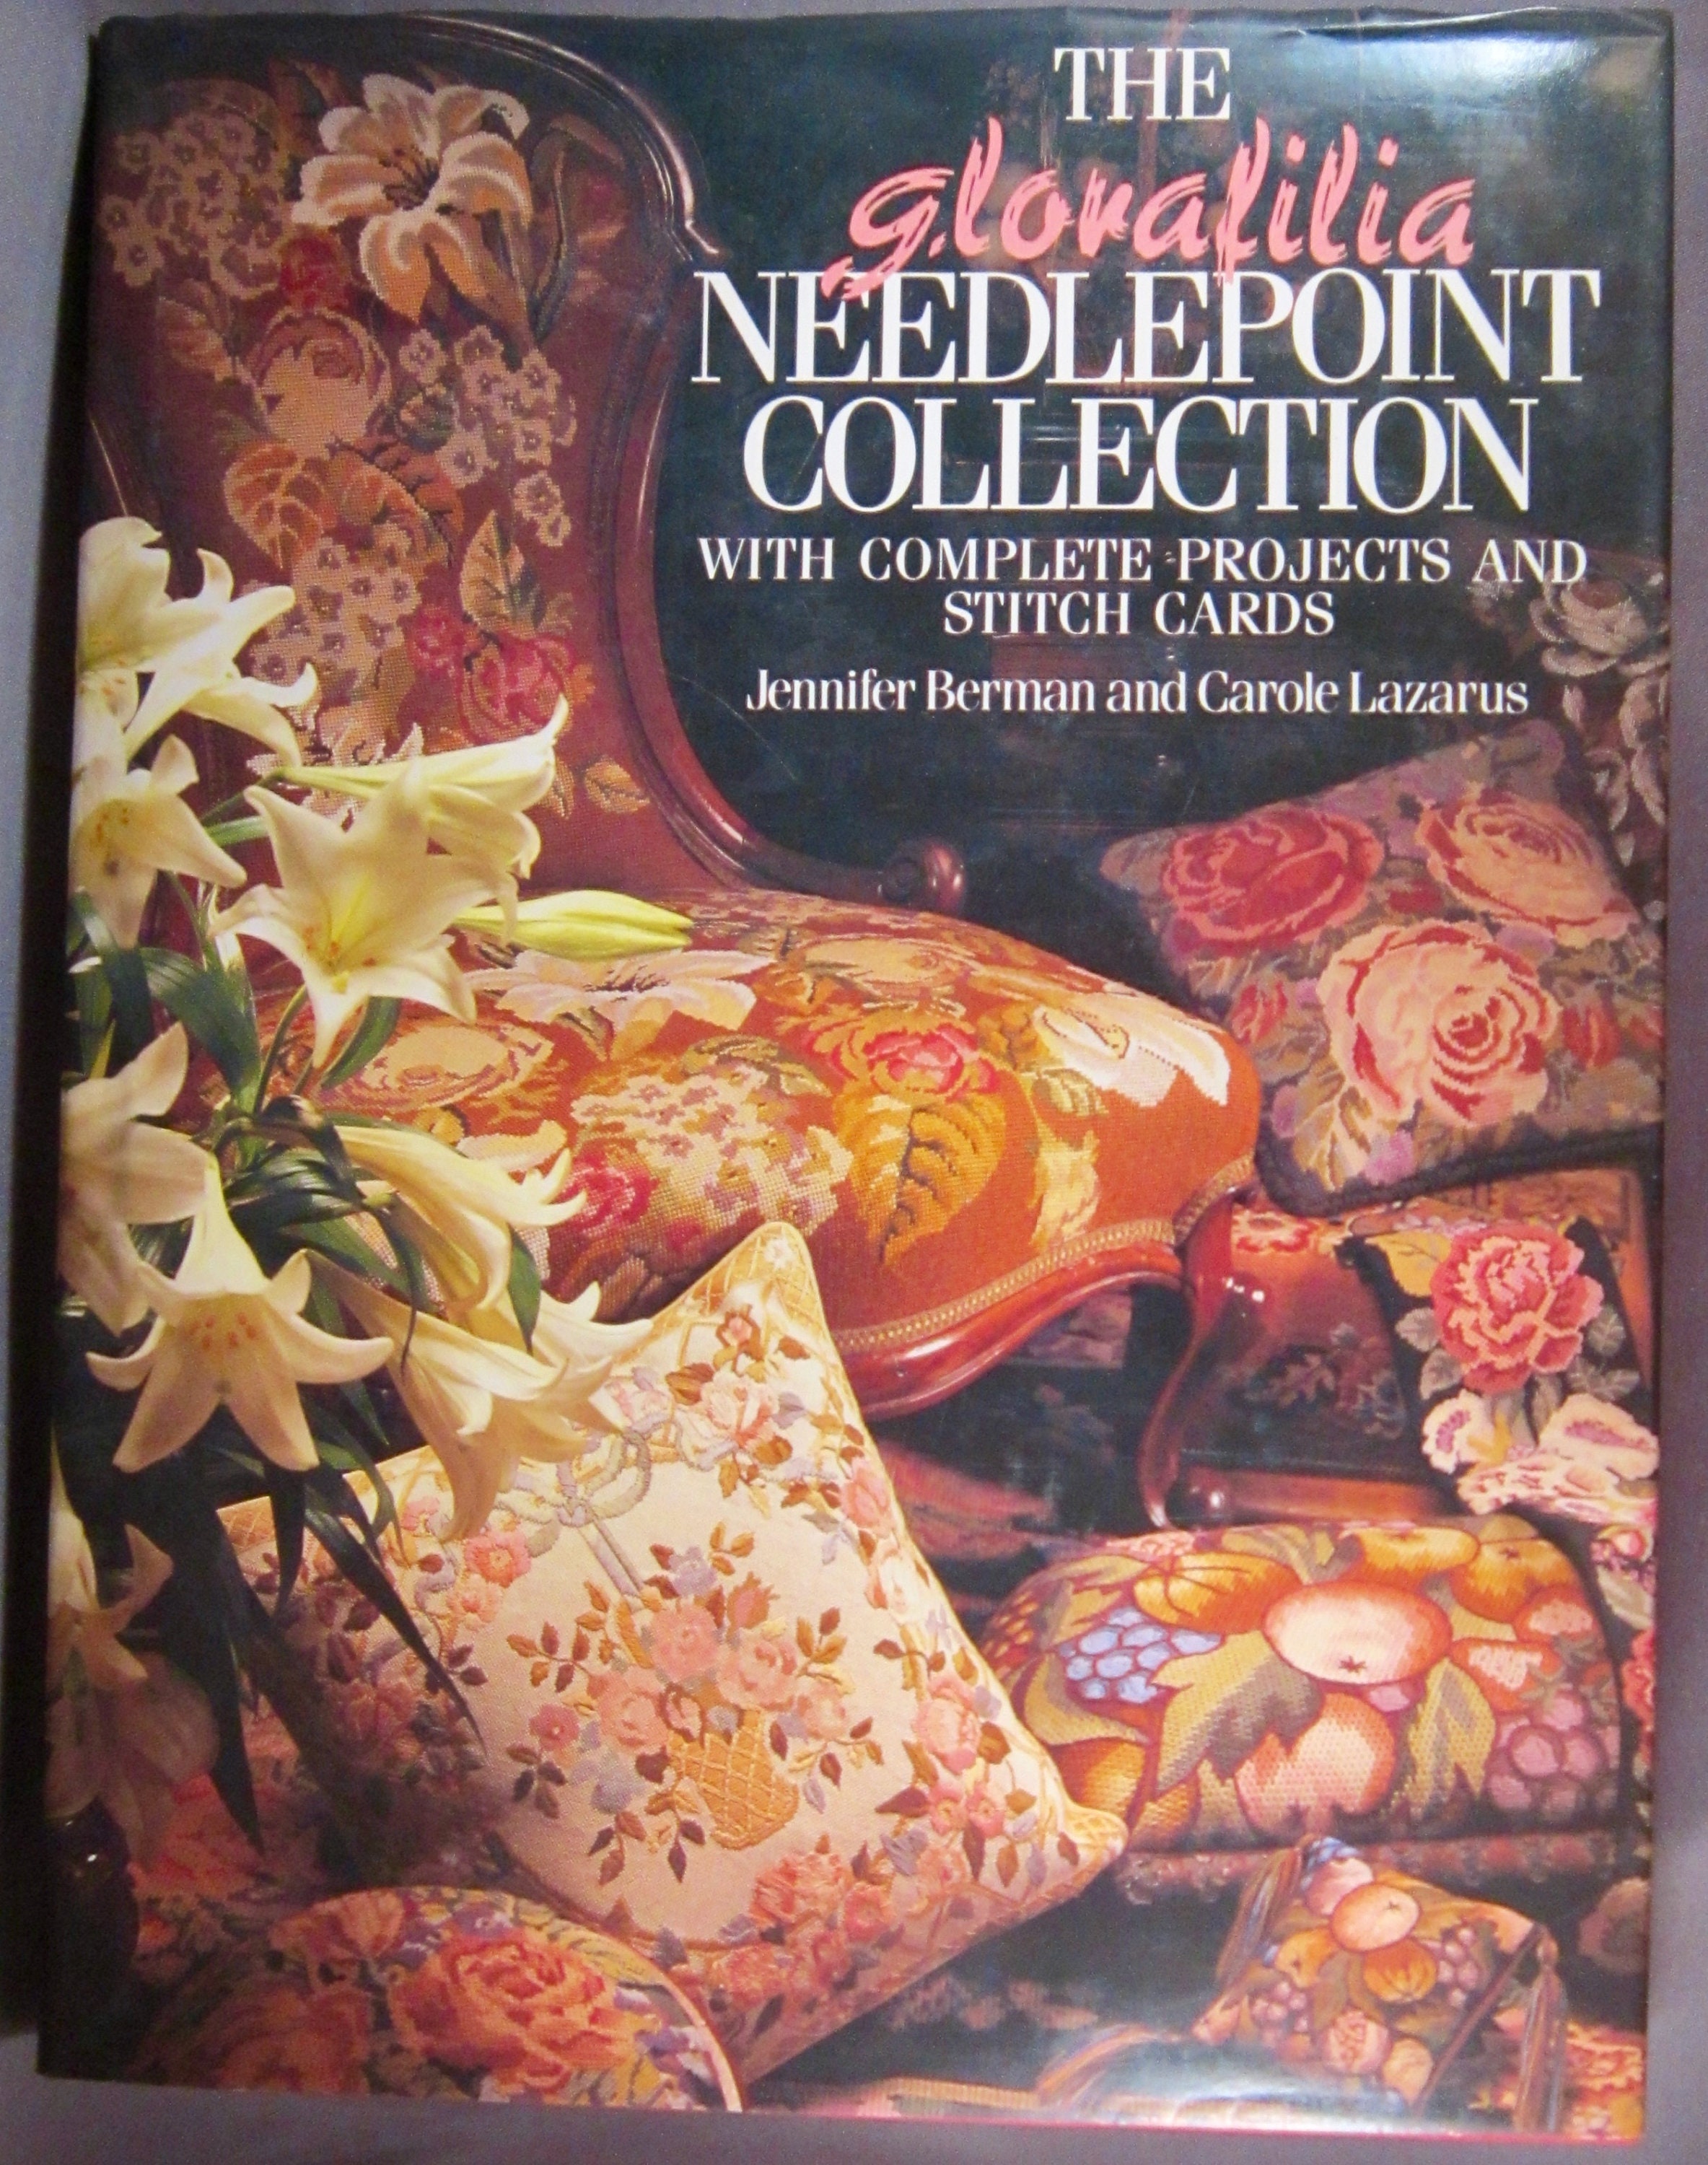 The Needlepoint Book 303 Stitches With Patterns & Projects by Jo Ippolito  Christensen Vintage Needlepoint Embroidery Book Vintage 1970's 